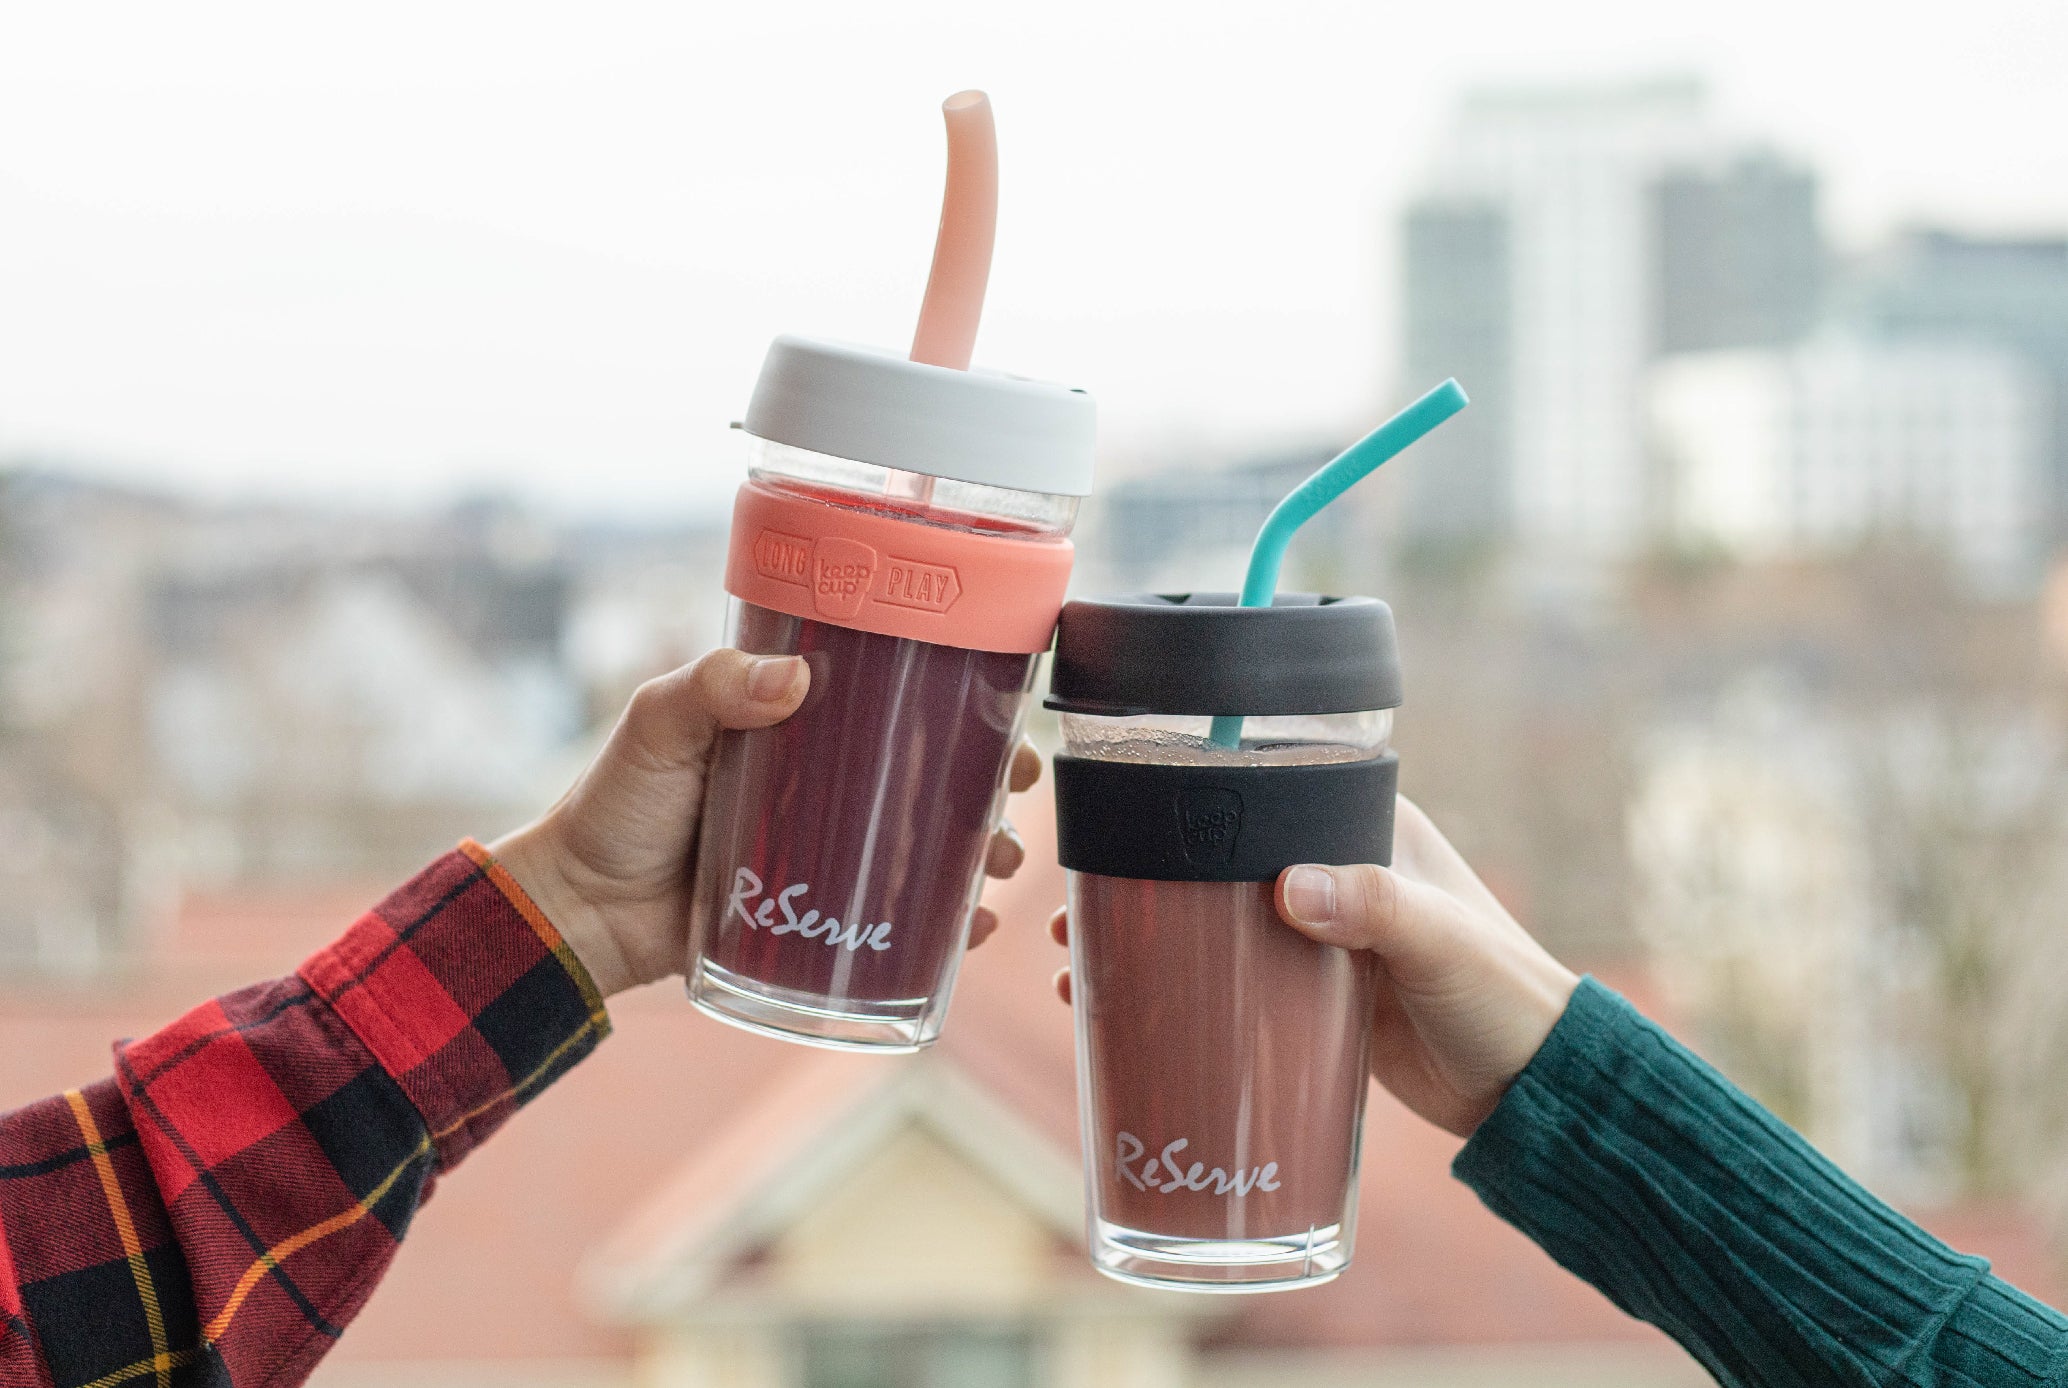 Two smoothie drinks in the ReServe Black Band KeepCup &amp; Pink Band KeepCup. The cups feature Rose Gold Smoothie Straw and Blue Island Paradise duo-hardness silicone straw.